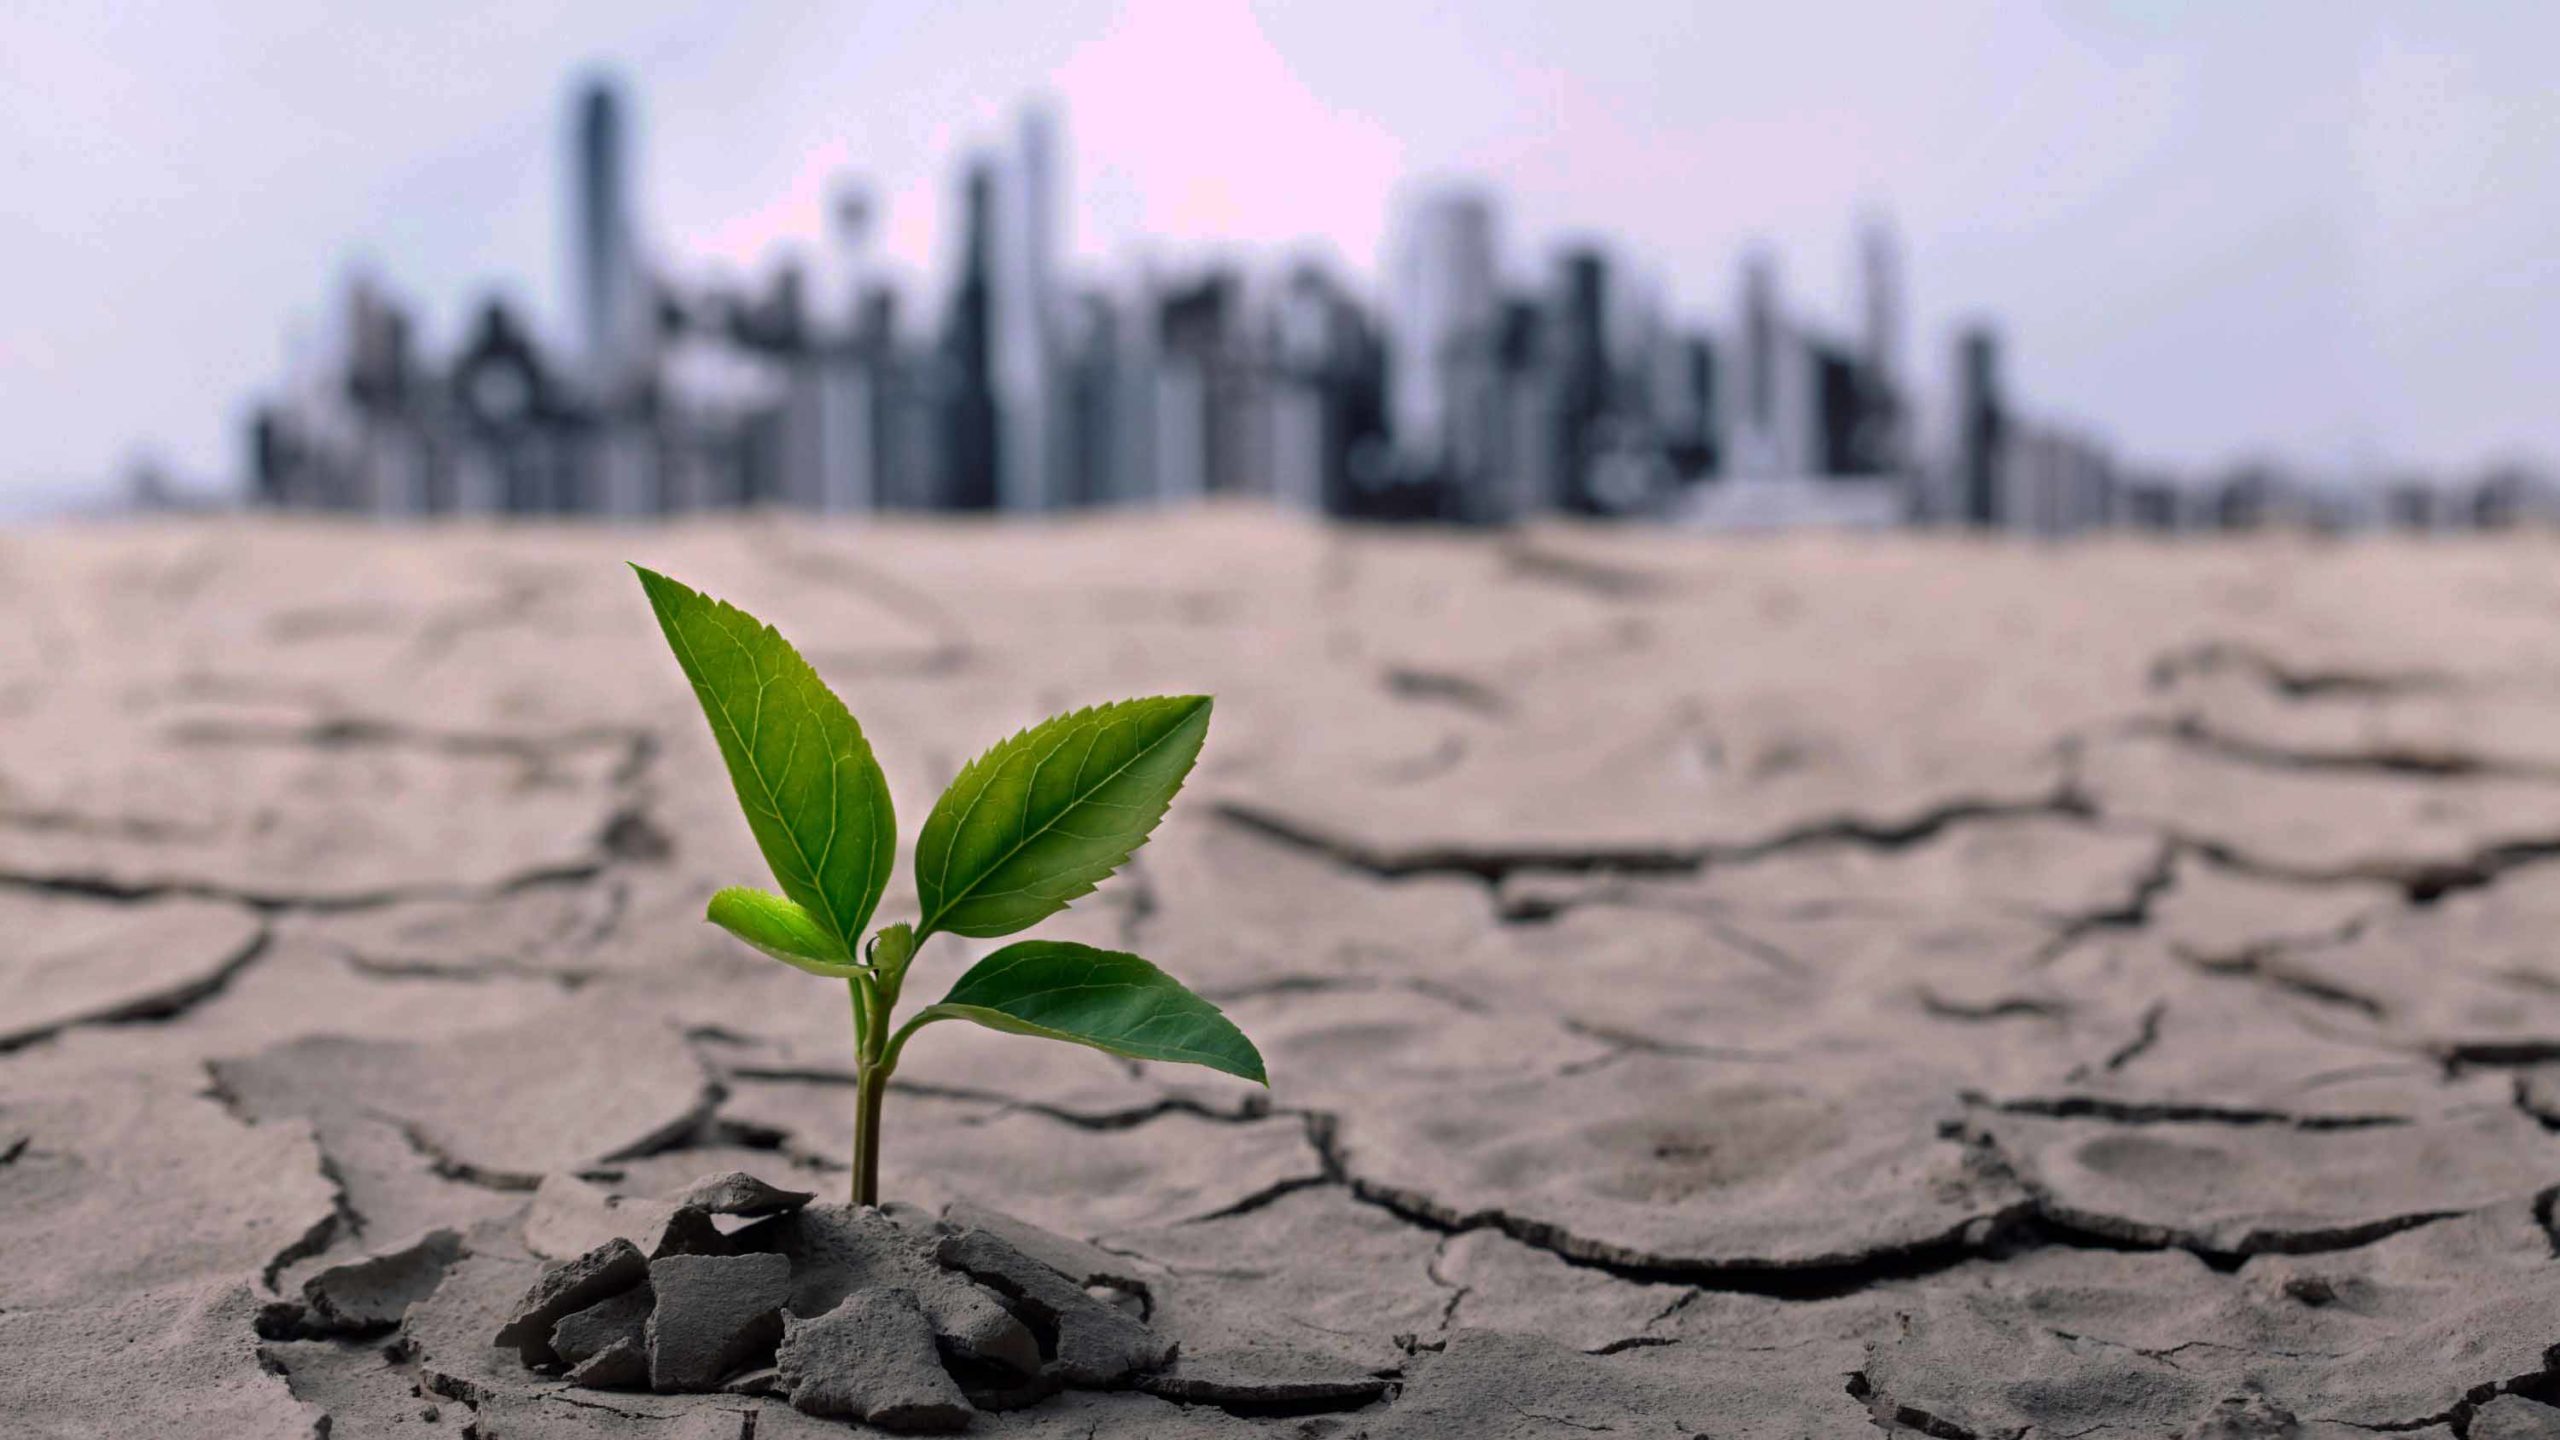 A plant growing out of a dry desert, symbolizing resilience in the face of global economic challenges, with a city in the background.